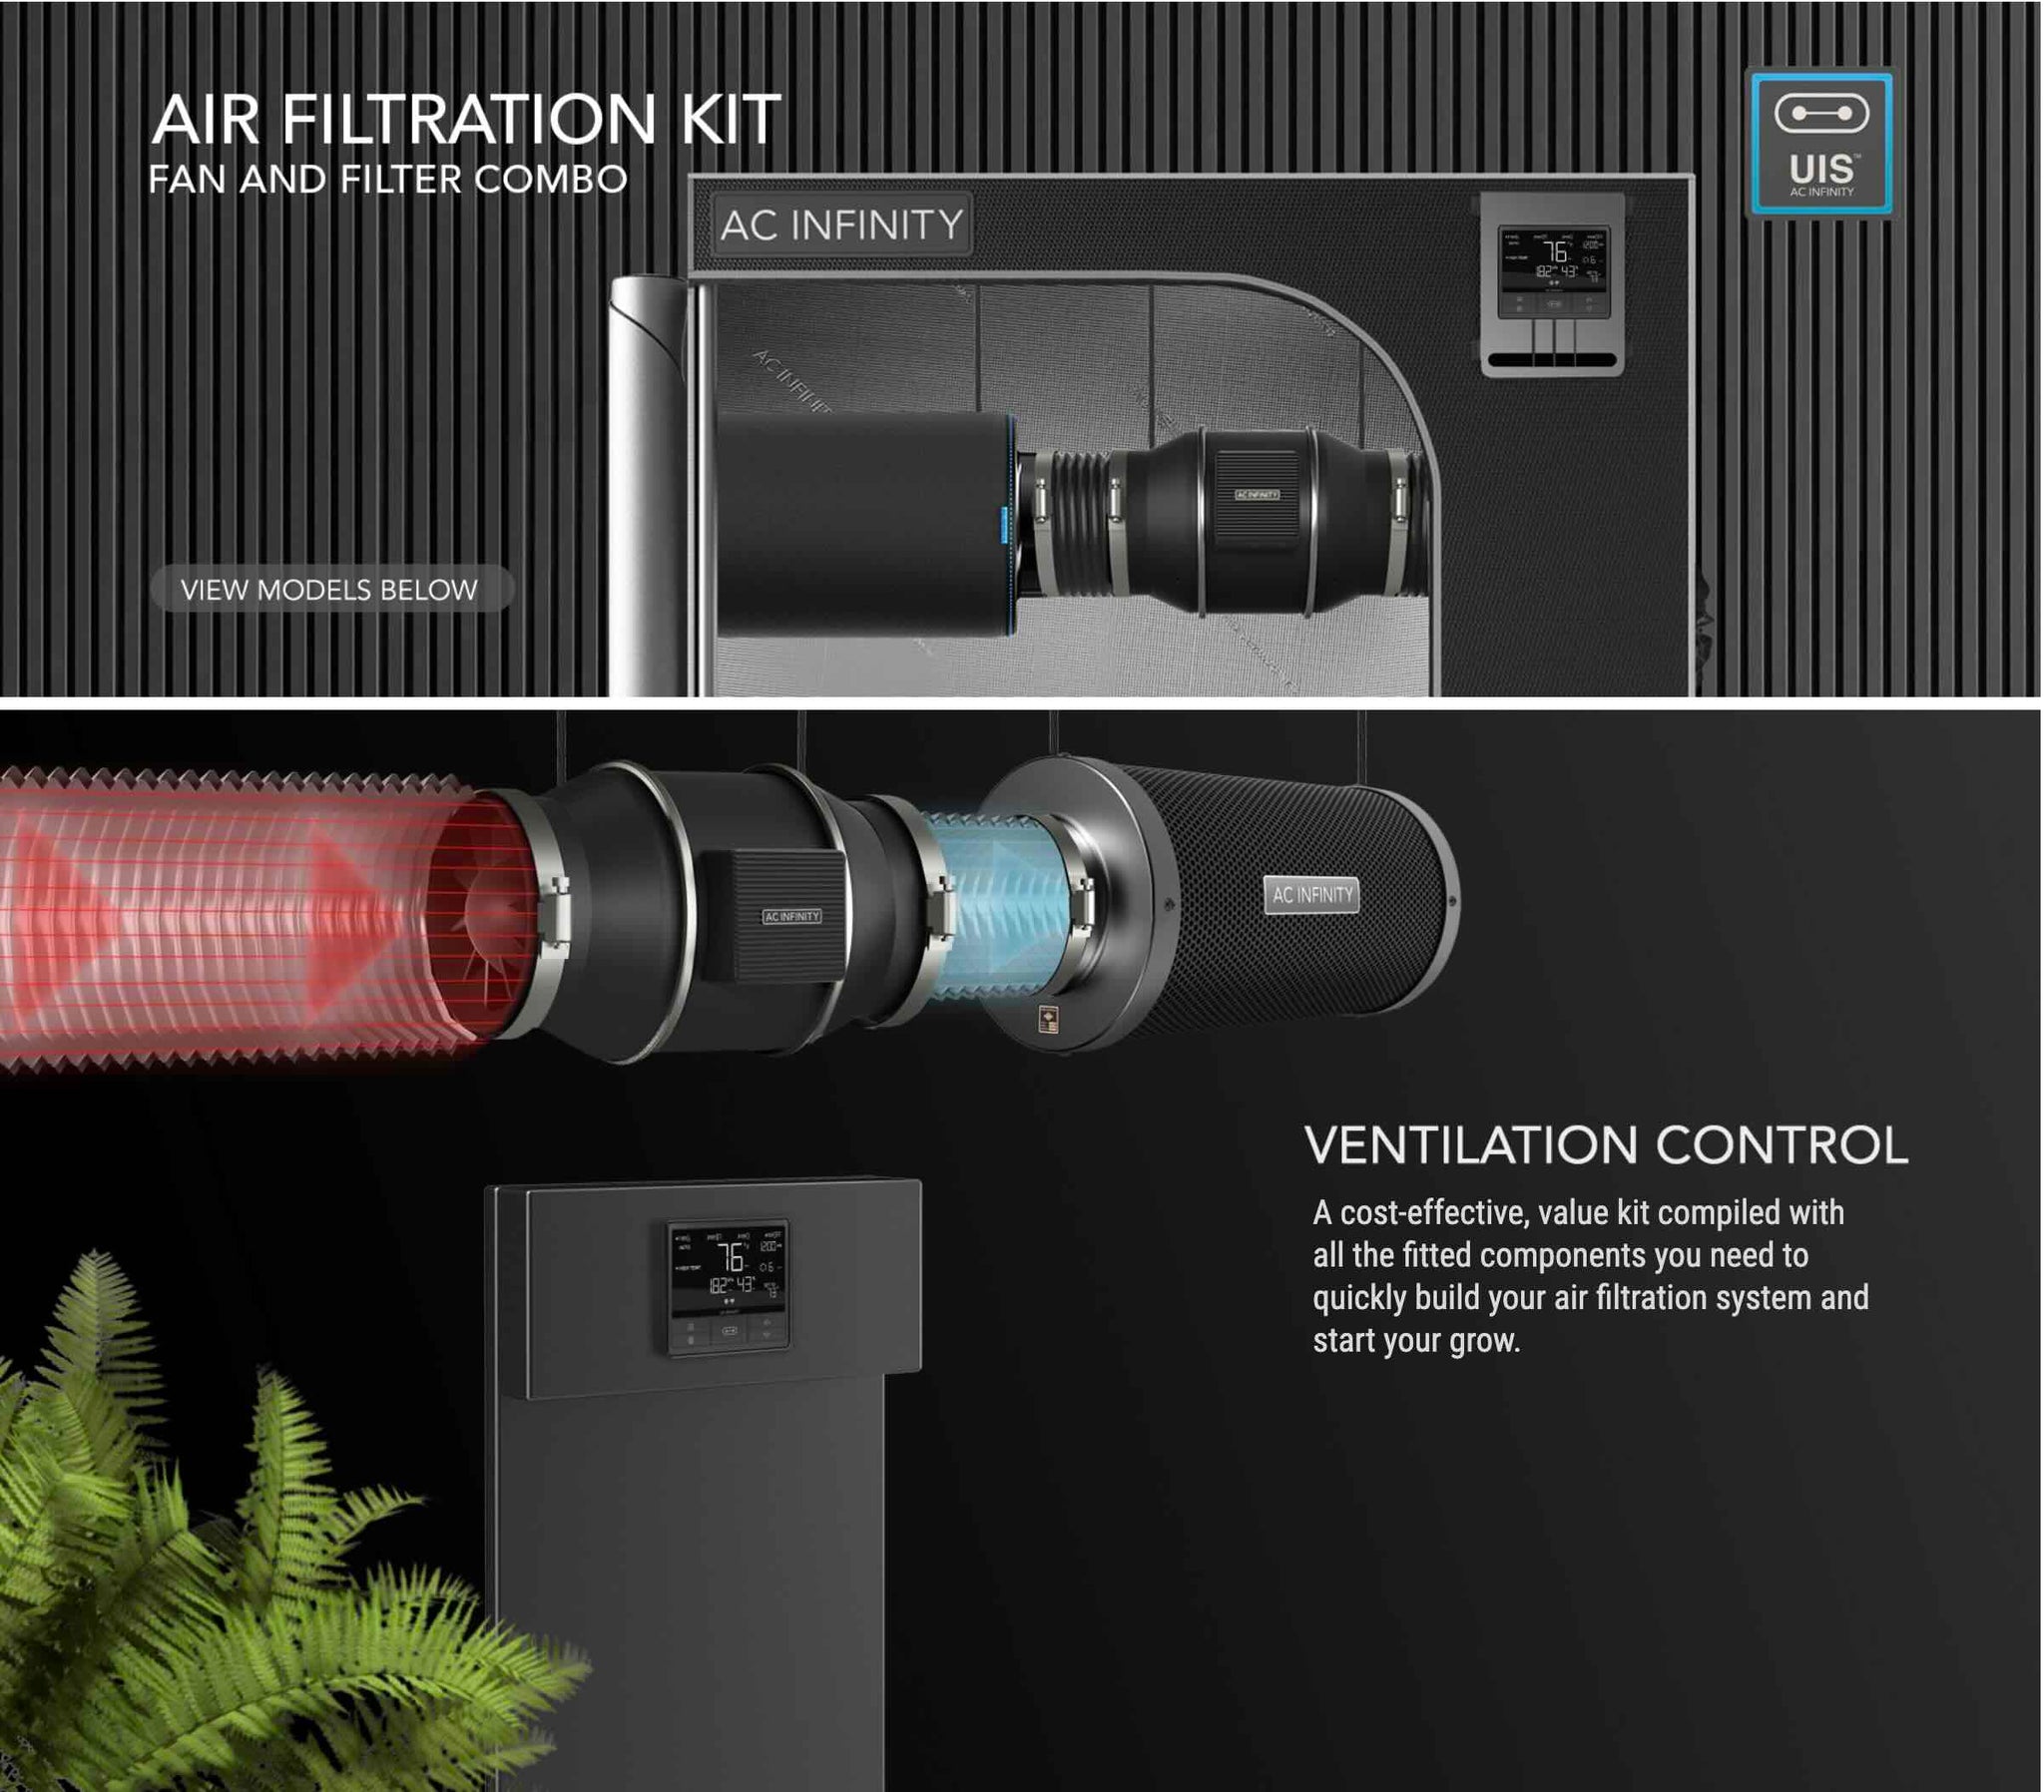 Air Filtration fan and filter Combo